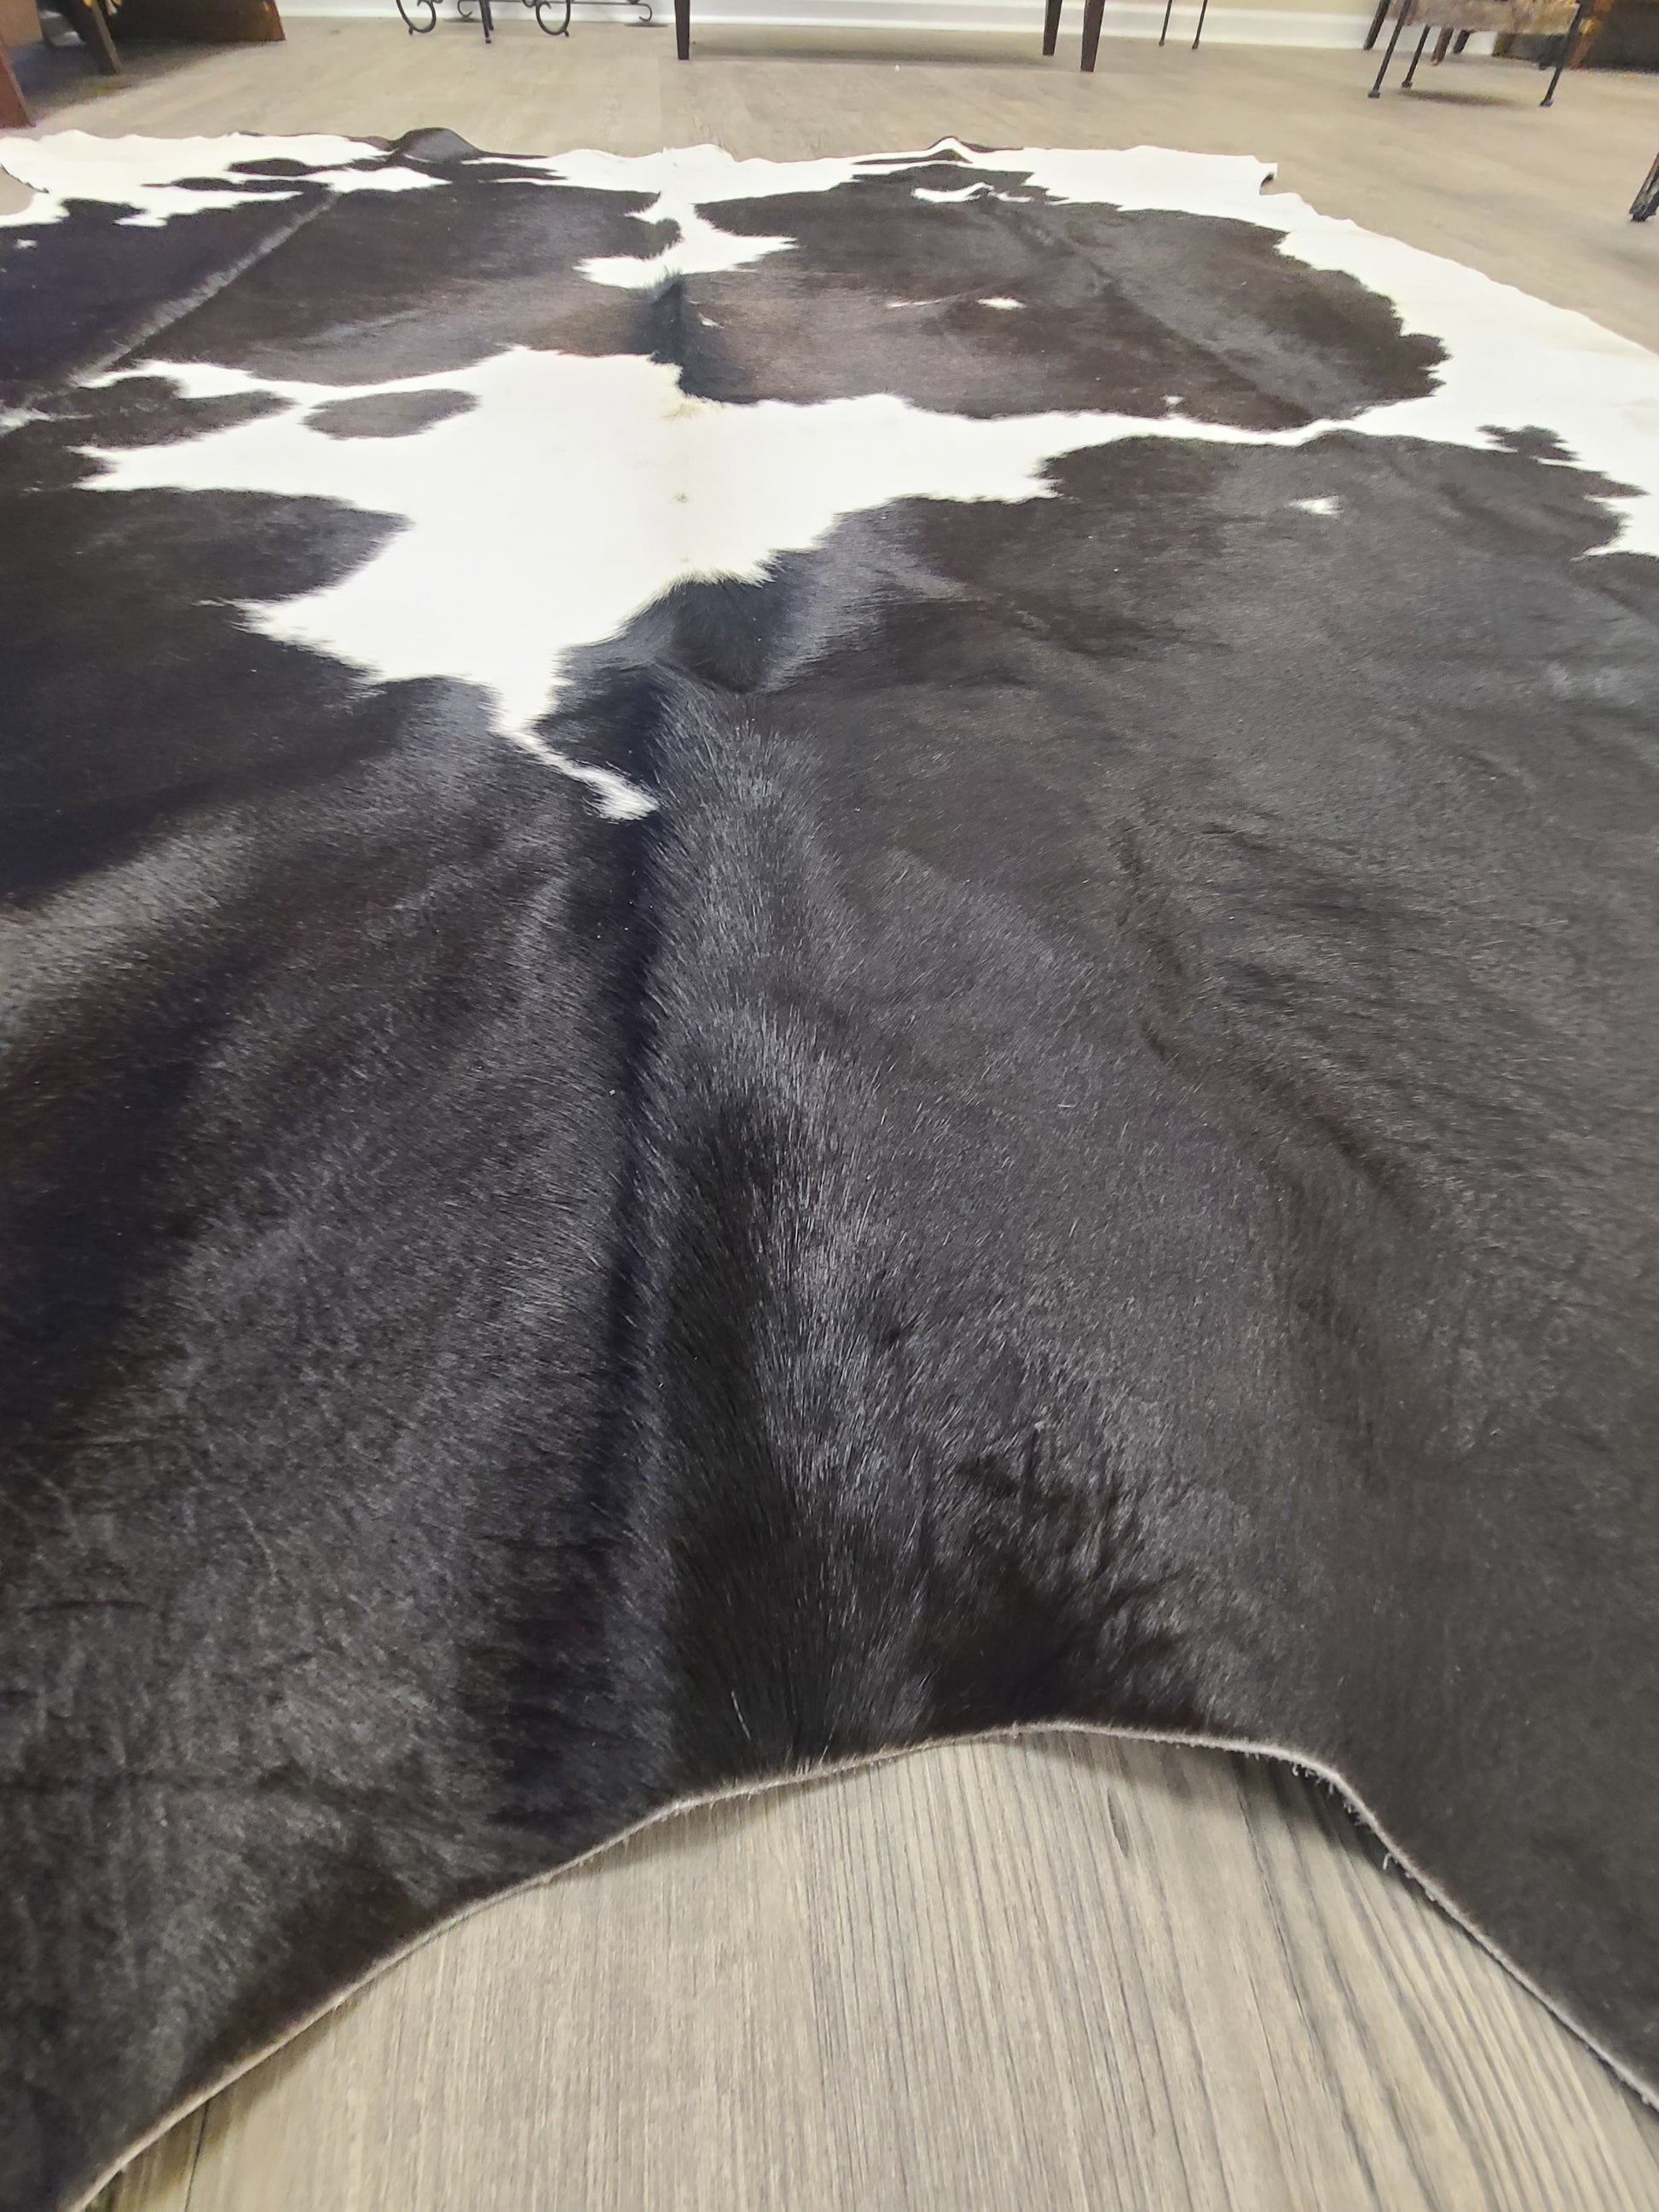 Brazilian Cowhide Rug - Black & White Spotted - 9 ft x 7 ft-Status Co. Leather Studio